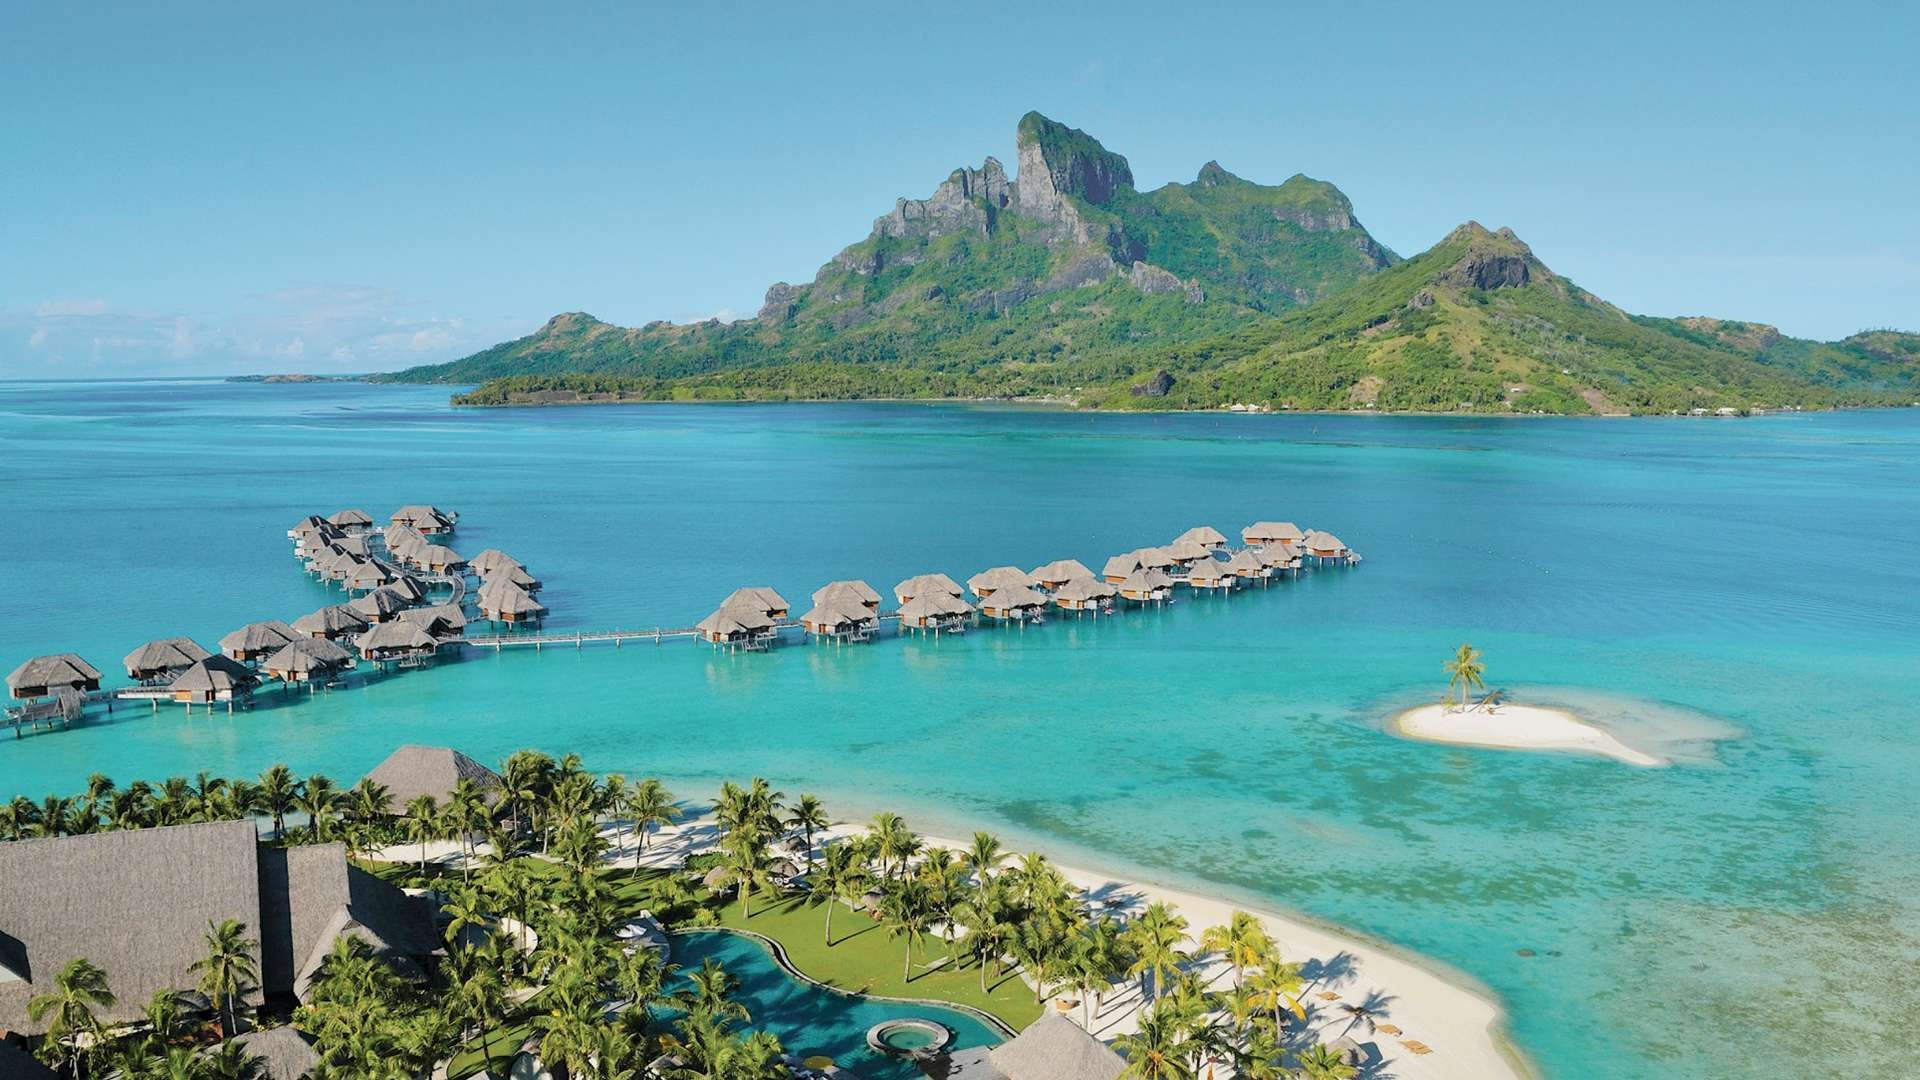 Bora Bora: The most famous island in Polynesia, A place of remarkable beauty, secluded luxury and turquoise waters. 1920x1080 Full HD Background.